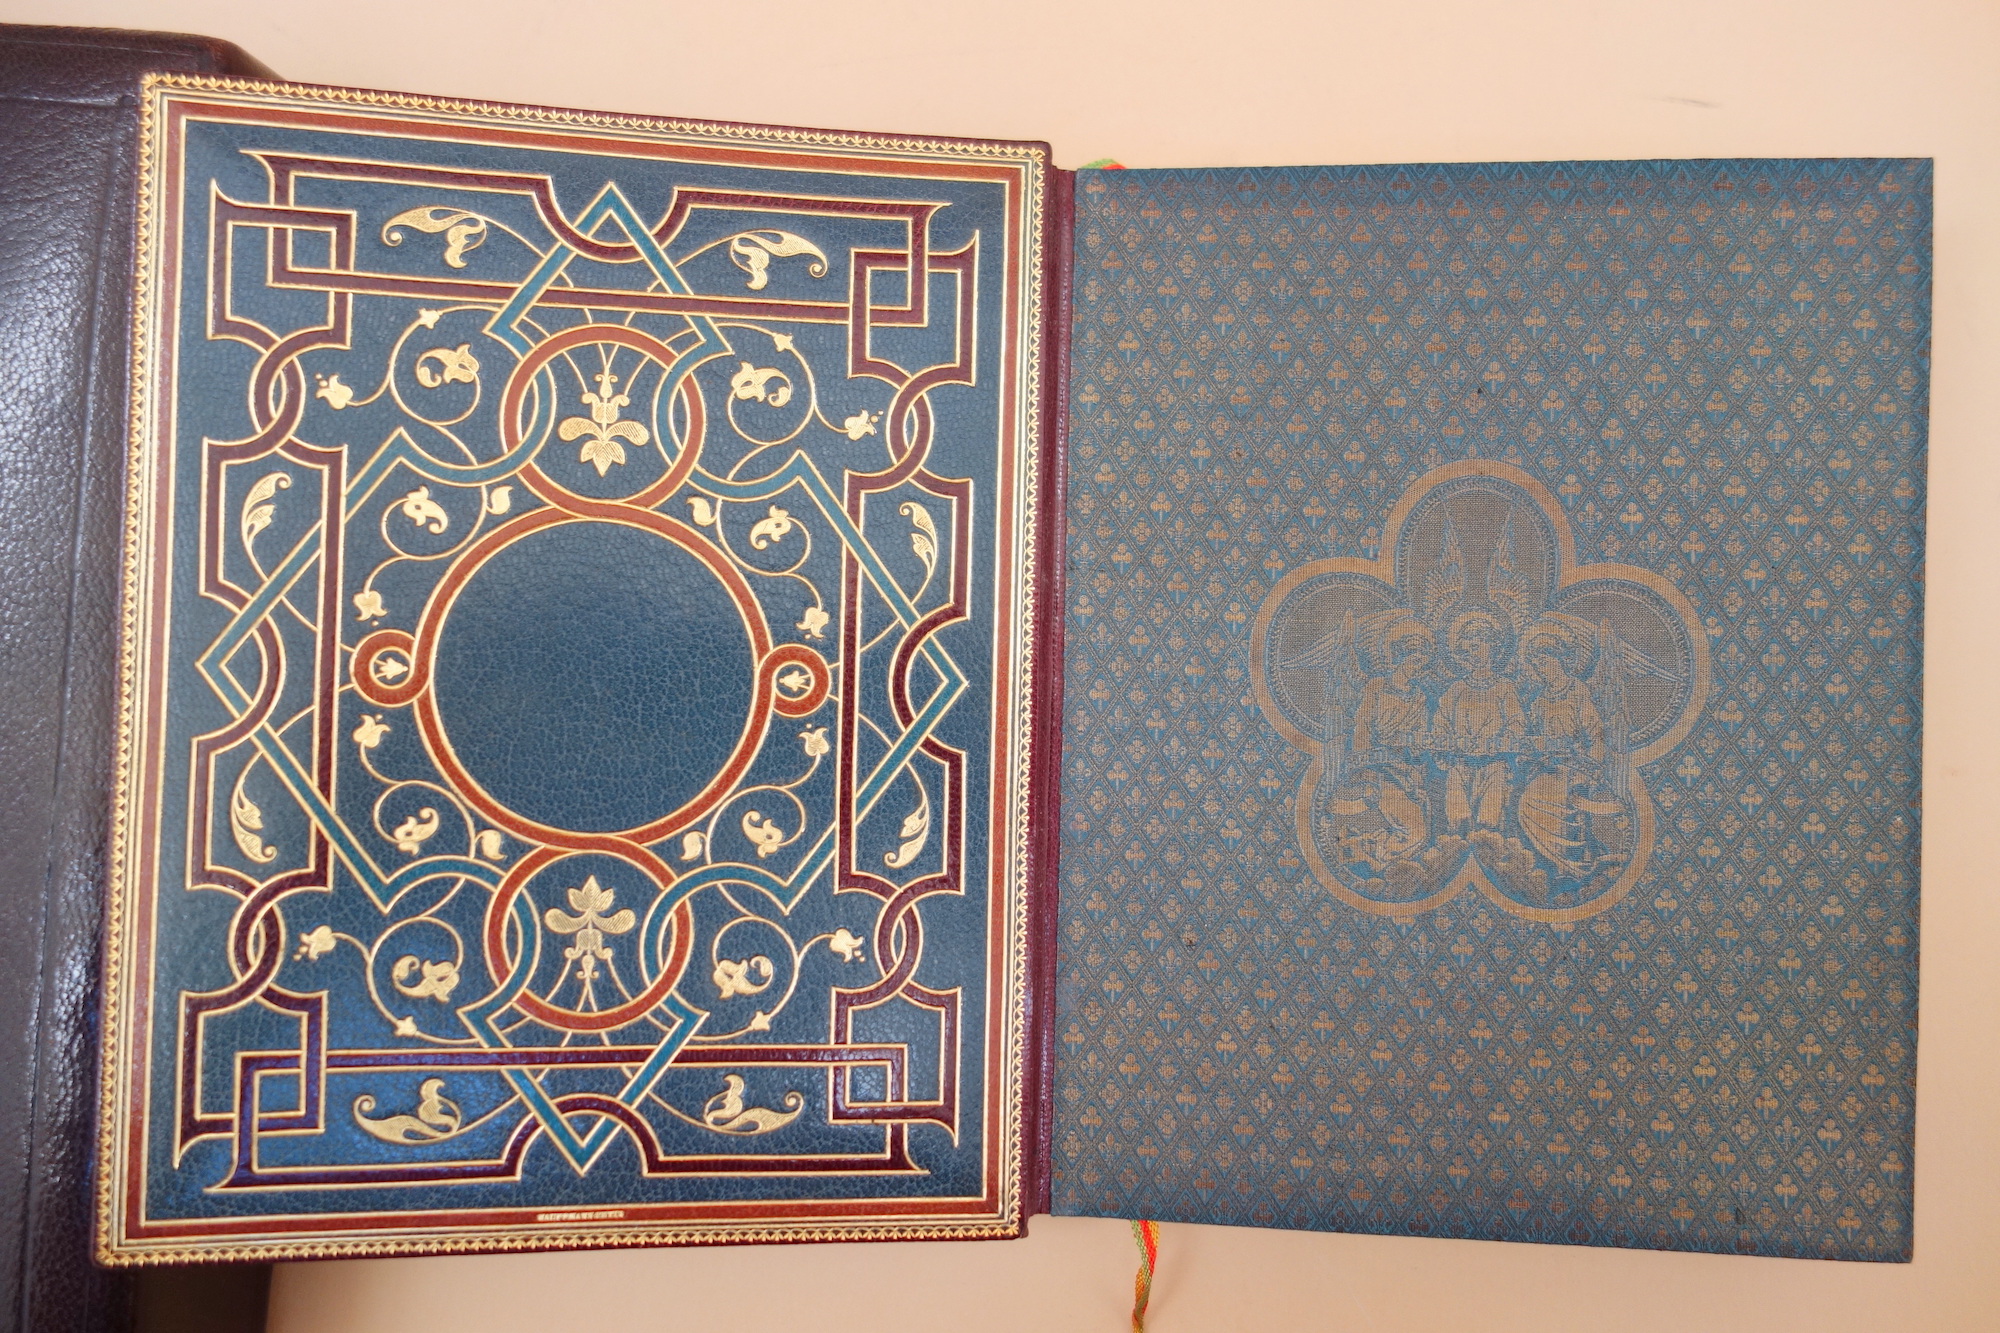 Elaborately inlaid leather pastedown endpapers in this copy of the Livre de Prieres